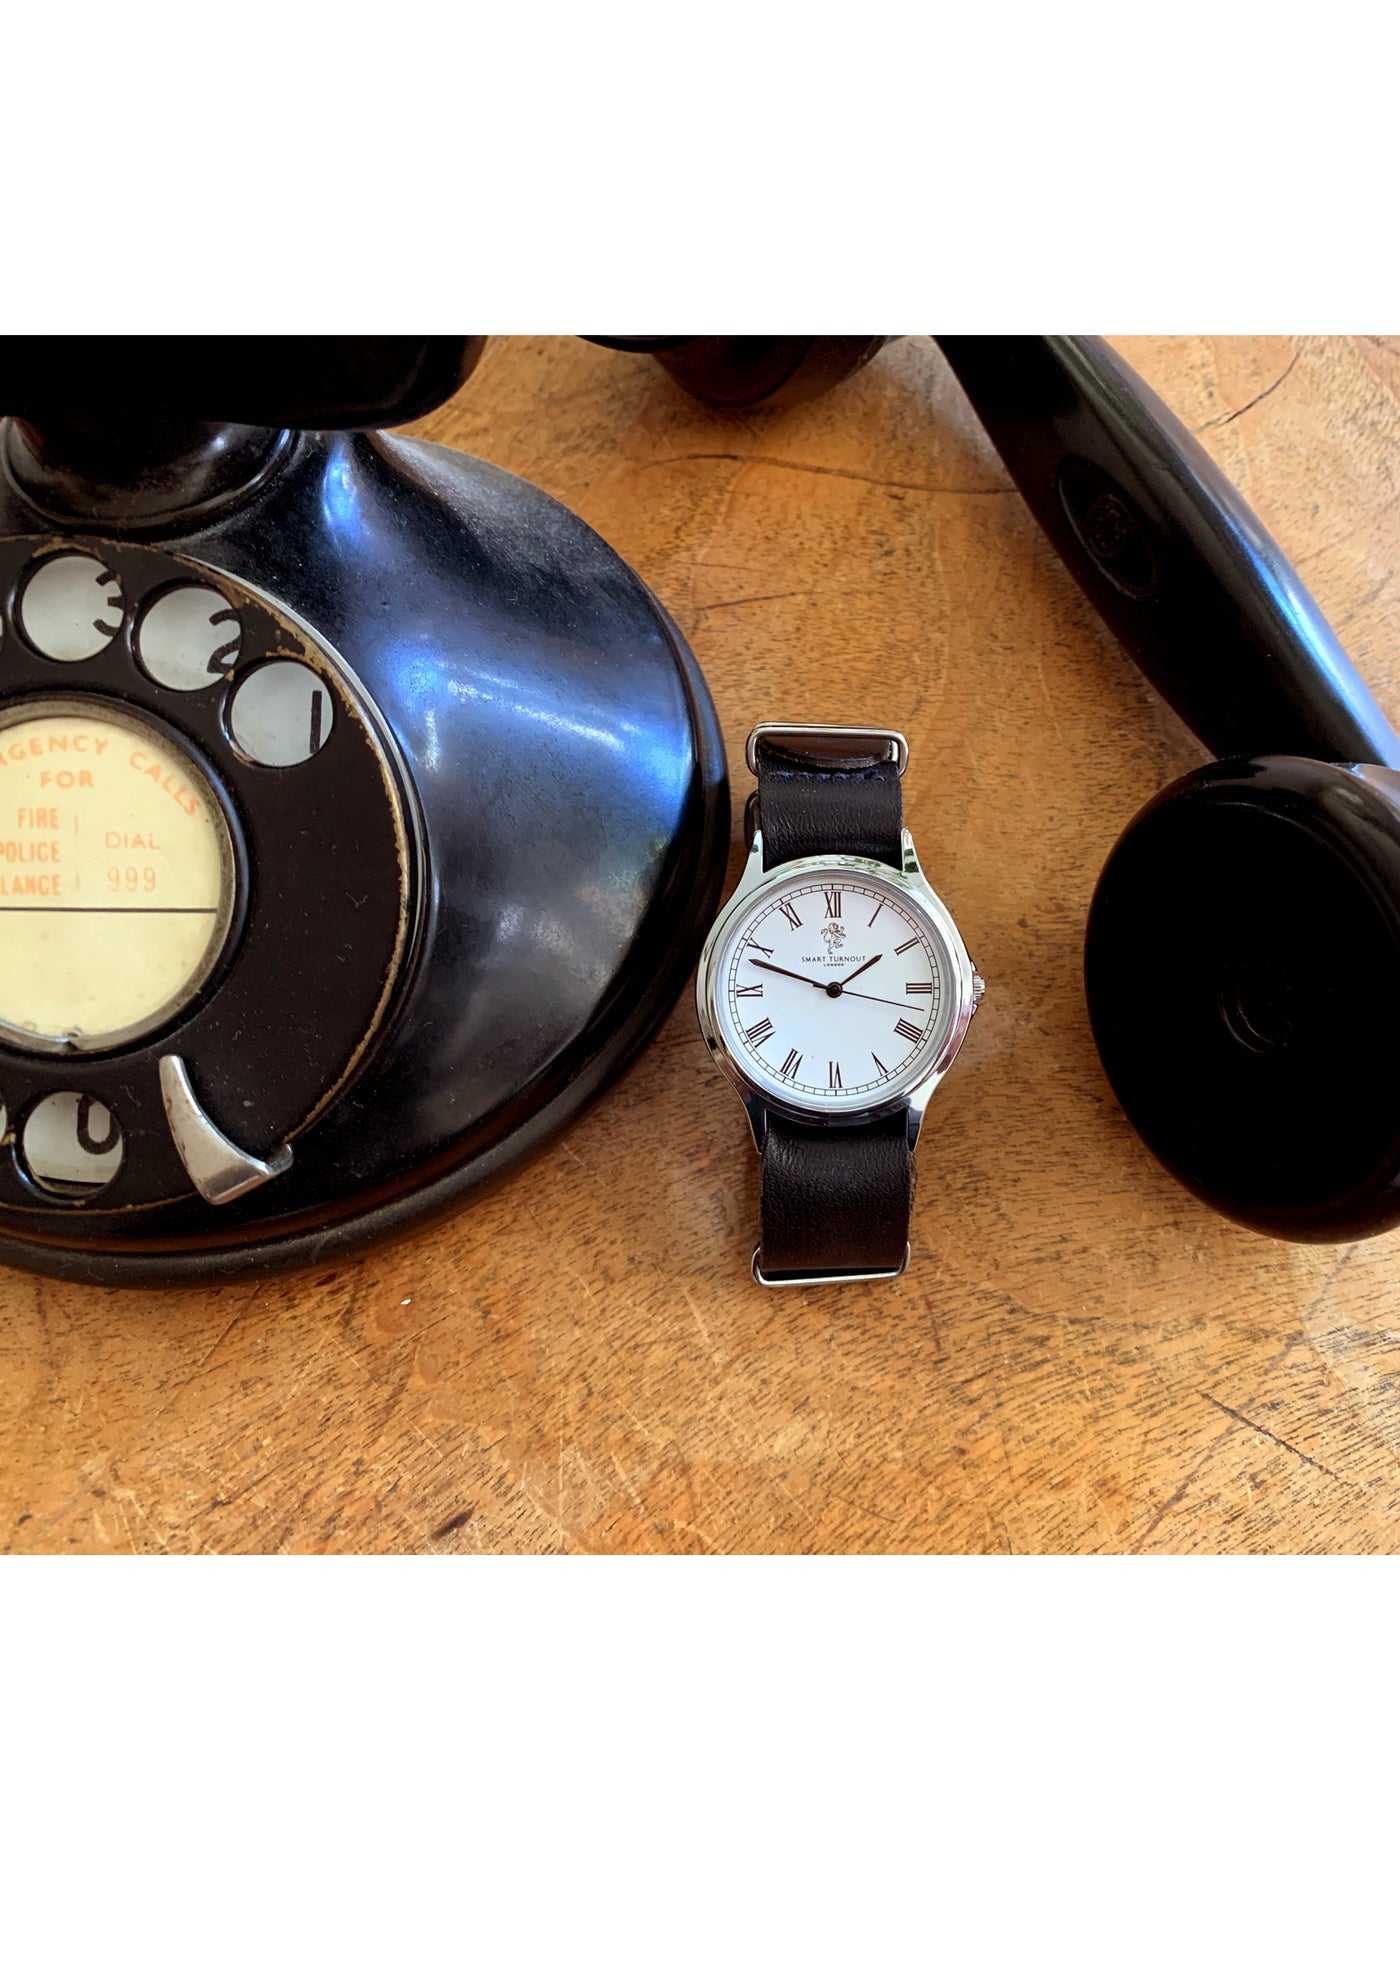 Equerry Watch, Smart Turnout Equerry Watch, Smart Turnout London Equerry Watch, Equerry Watches, Smart Turnout Watche, Smart Turnout London Watch, Smart Turnout, Smart Turnout London